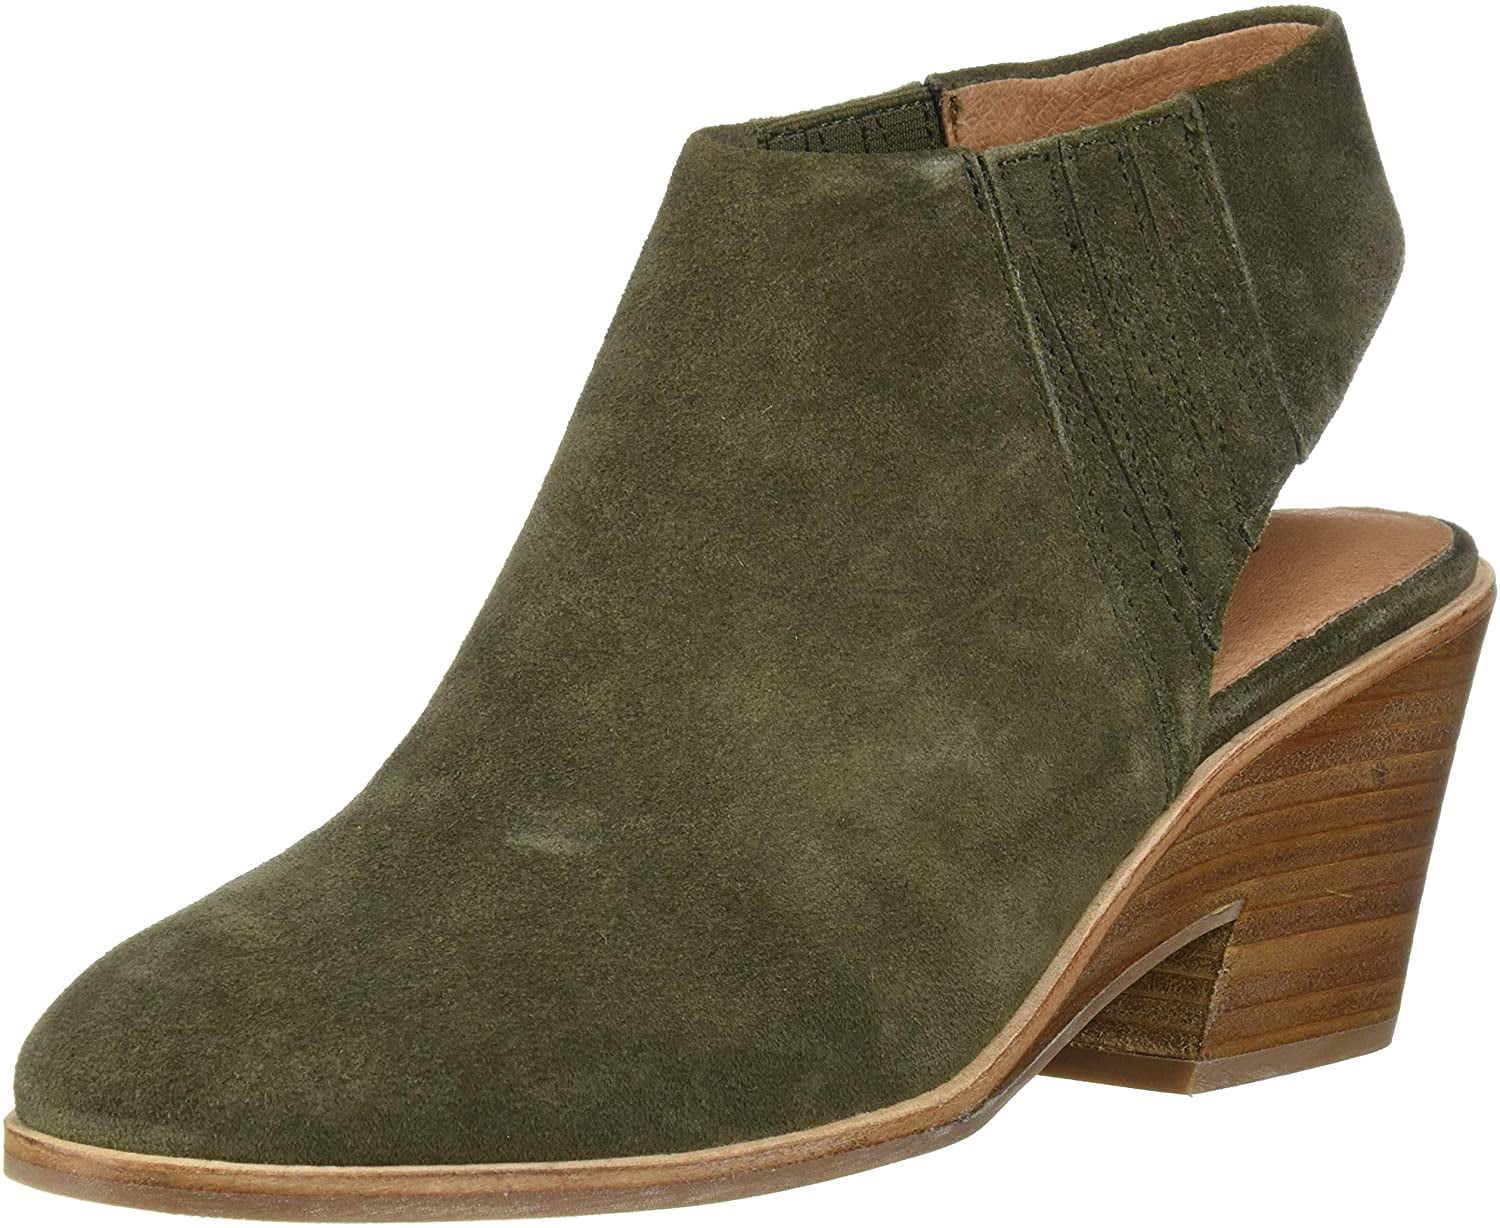 Details about   Gentle Souls by Kenneth Cole Women's Blaise-Slingback Fashion Boot